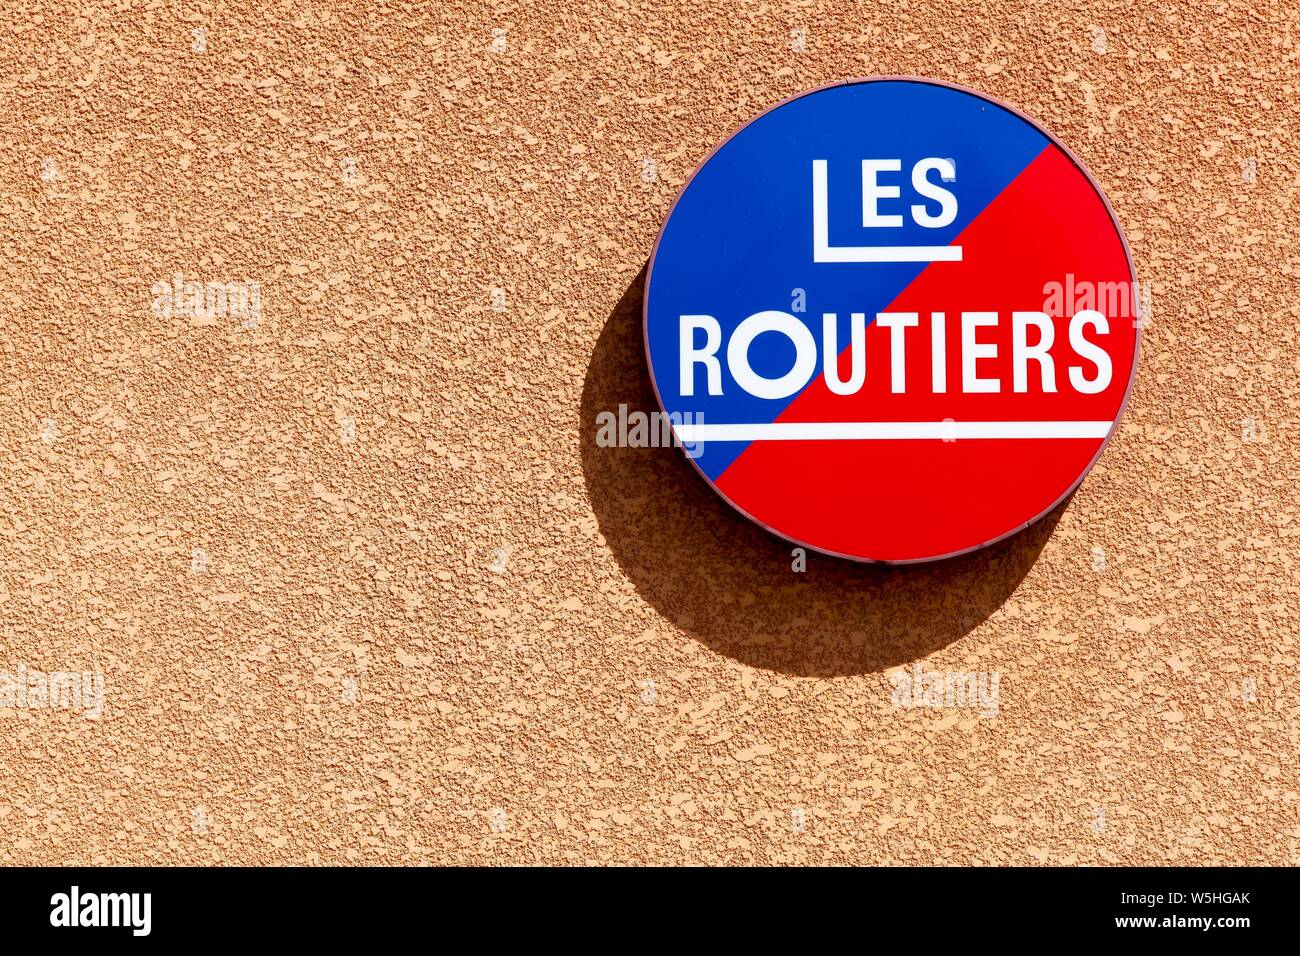 Belleville, France - July 16, 2015: Les Routiers logo. Les Routiers is a company that provides travel guide books for eating out and hotels in France Stock Photo